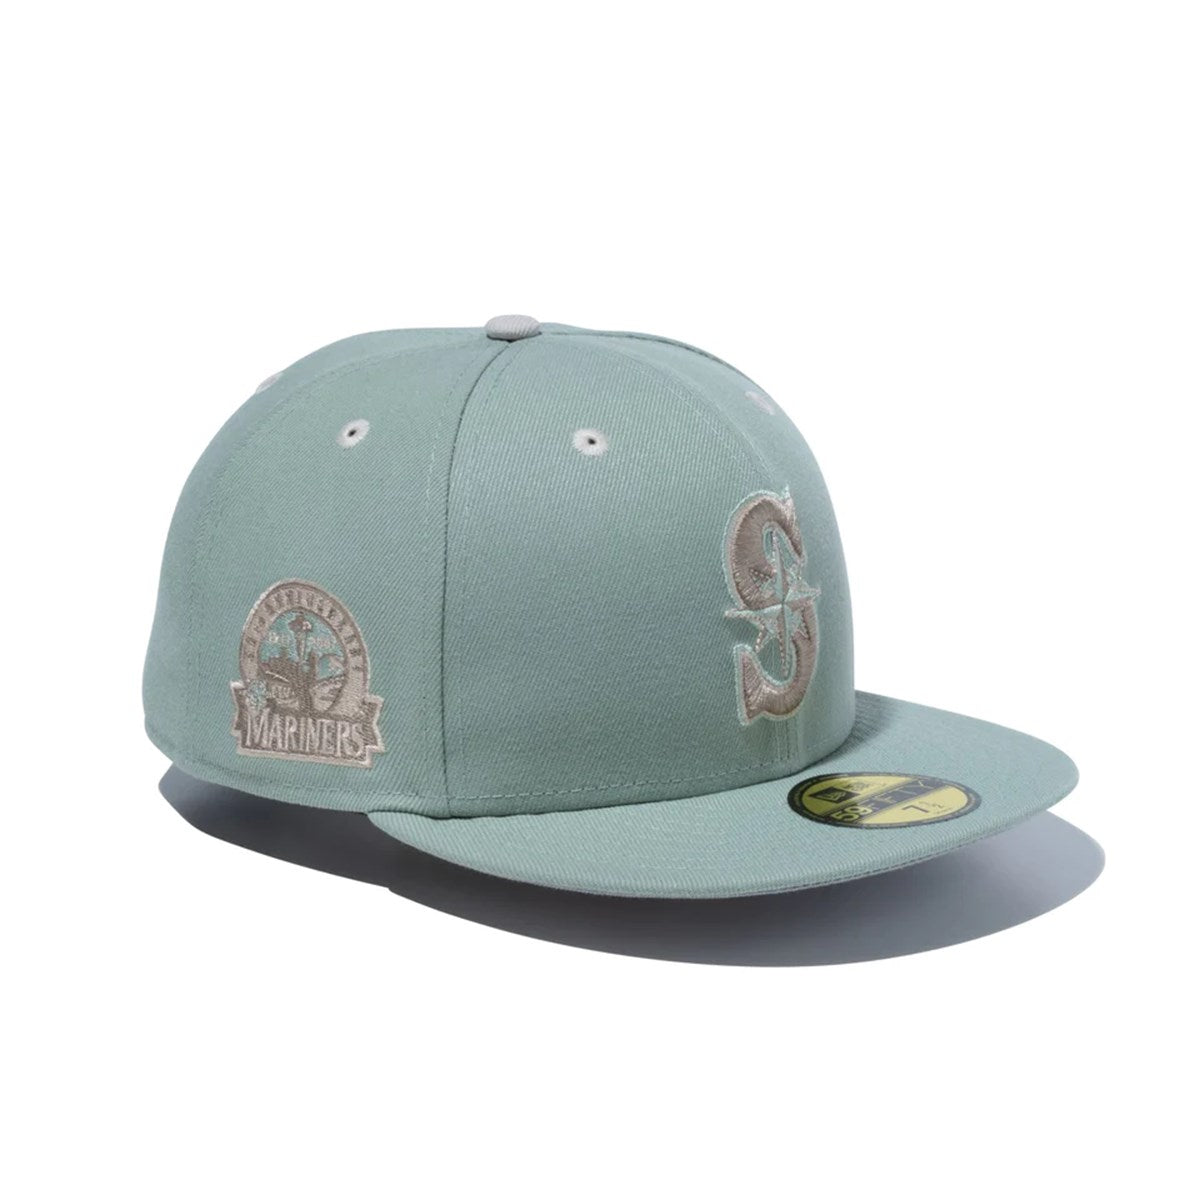 NEW ERA Seatles Mariners - 59FIFTY LIGHT GREEN PACK【14174578】